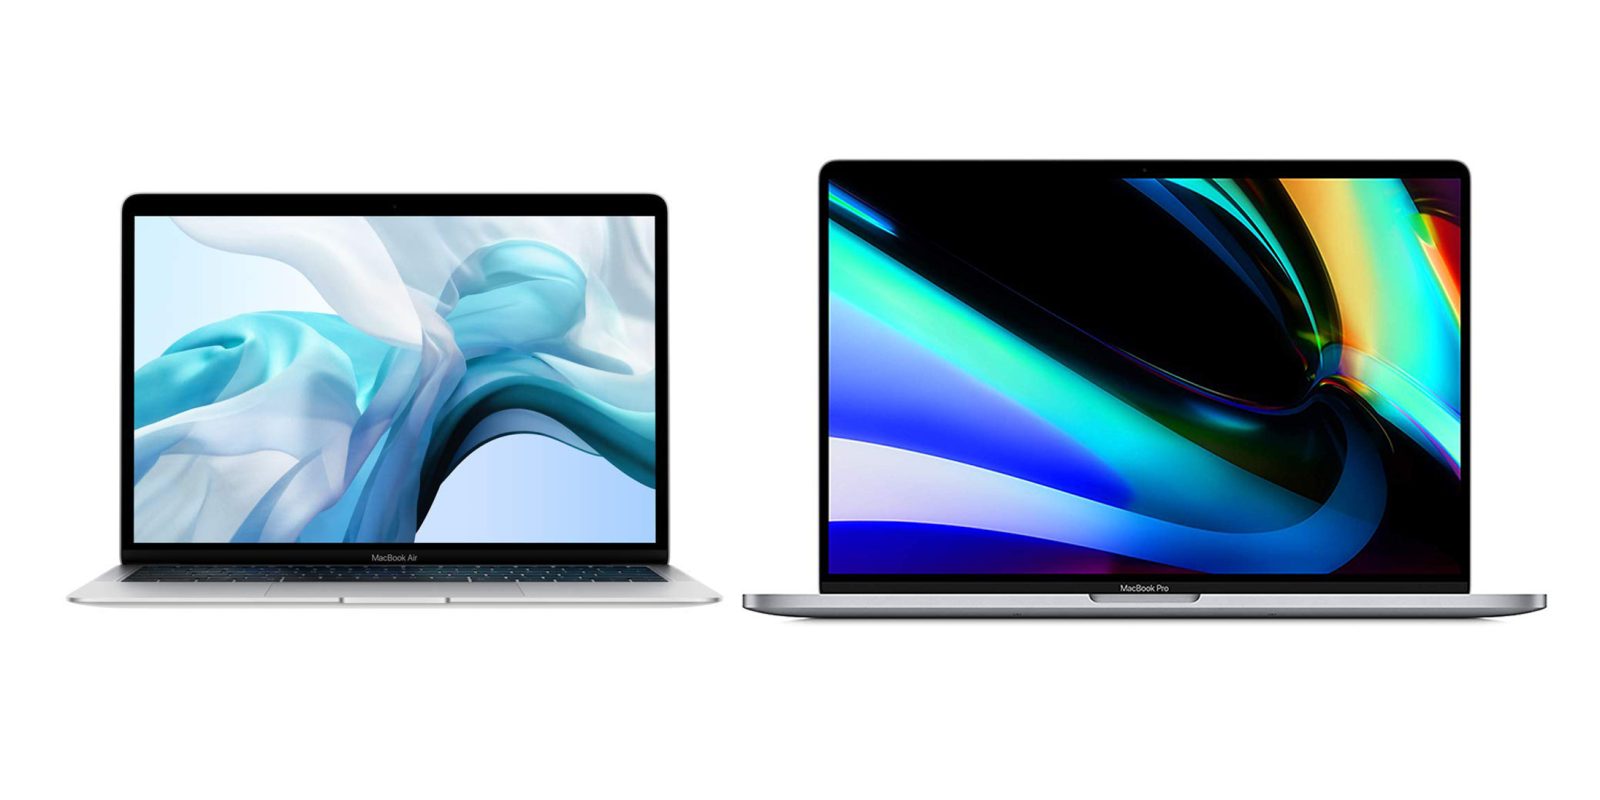 Black Friday pricing hits MacBook Air, 16-inch Pro, more with up to - Will There Be Black Friday Deals On Macbook Pro 16-inch